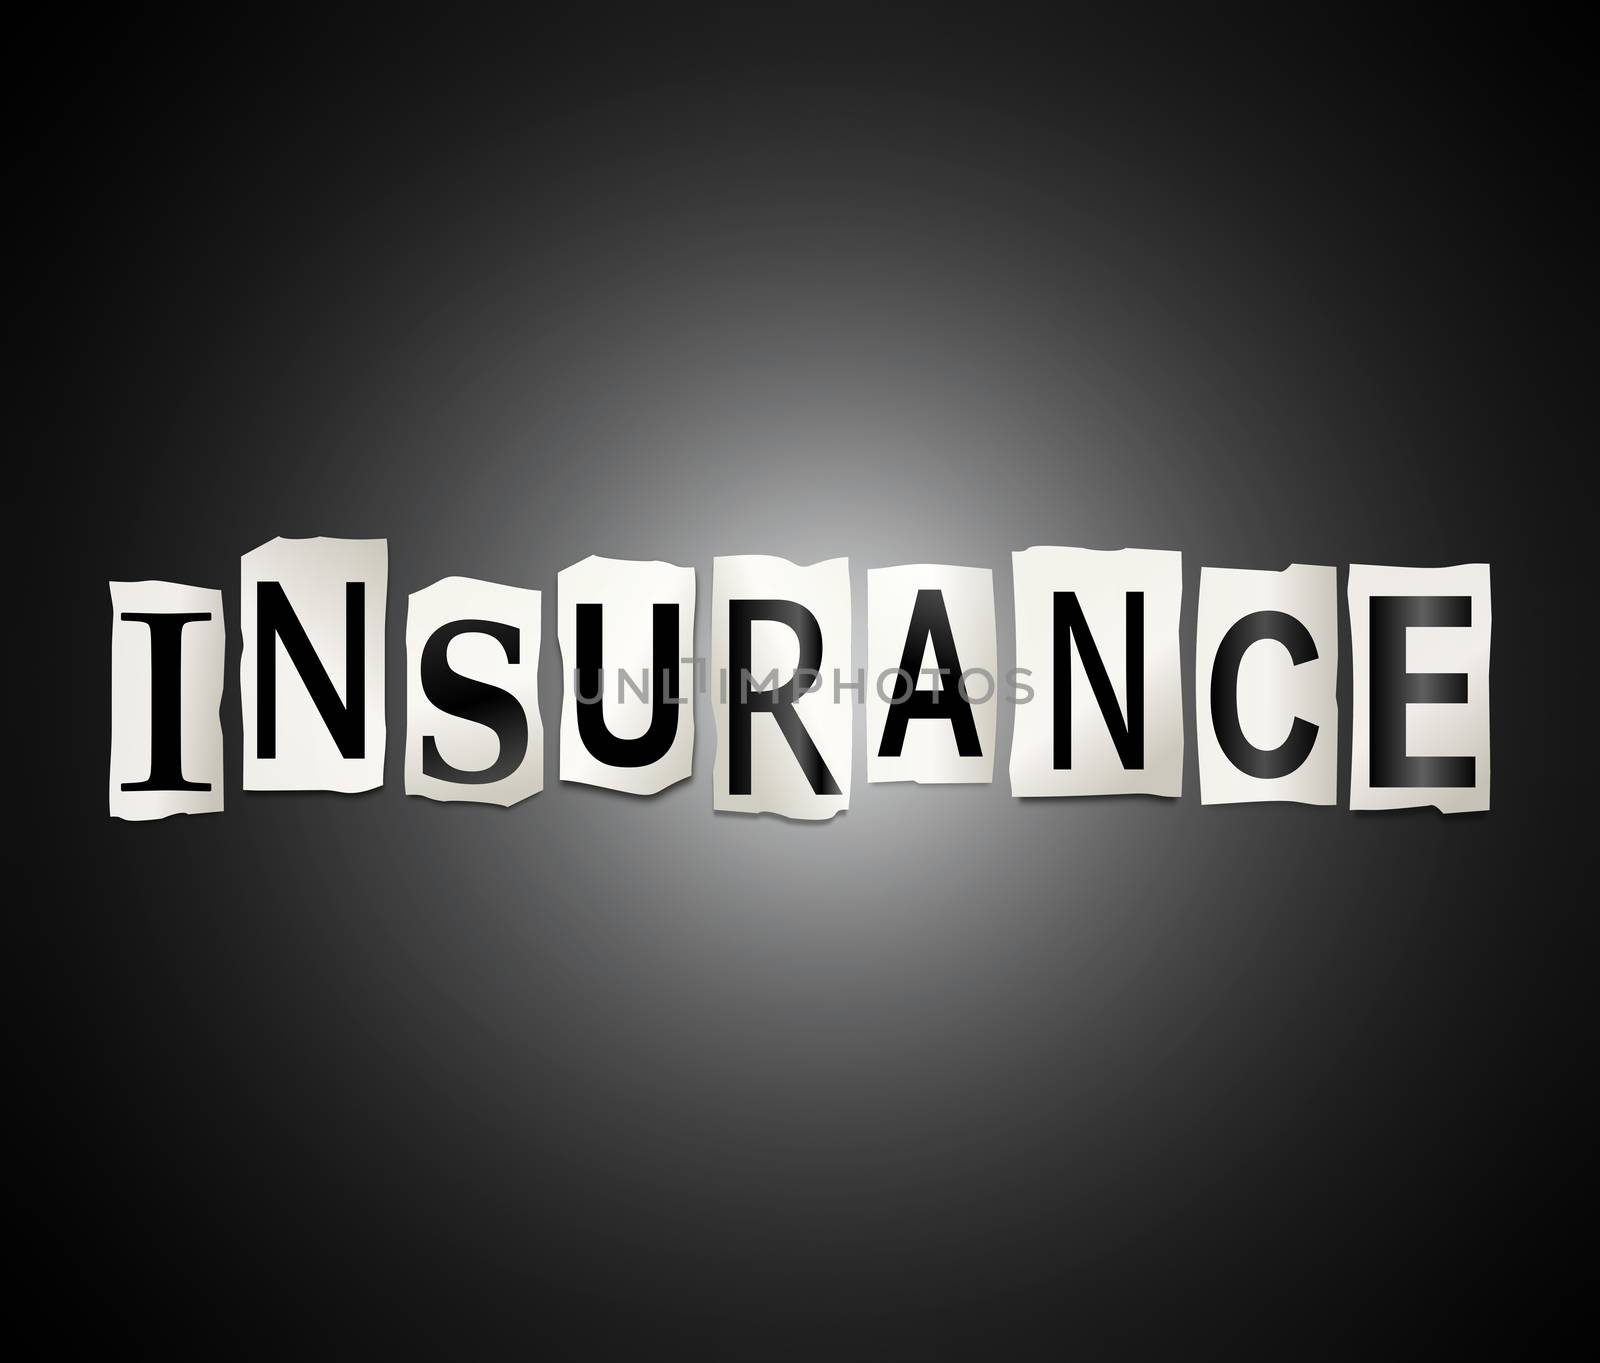 Illustration depicting a set of cut out printed letters arranged to form the word insurance.